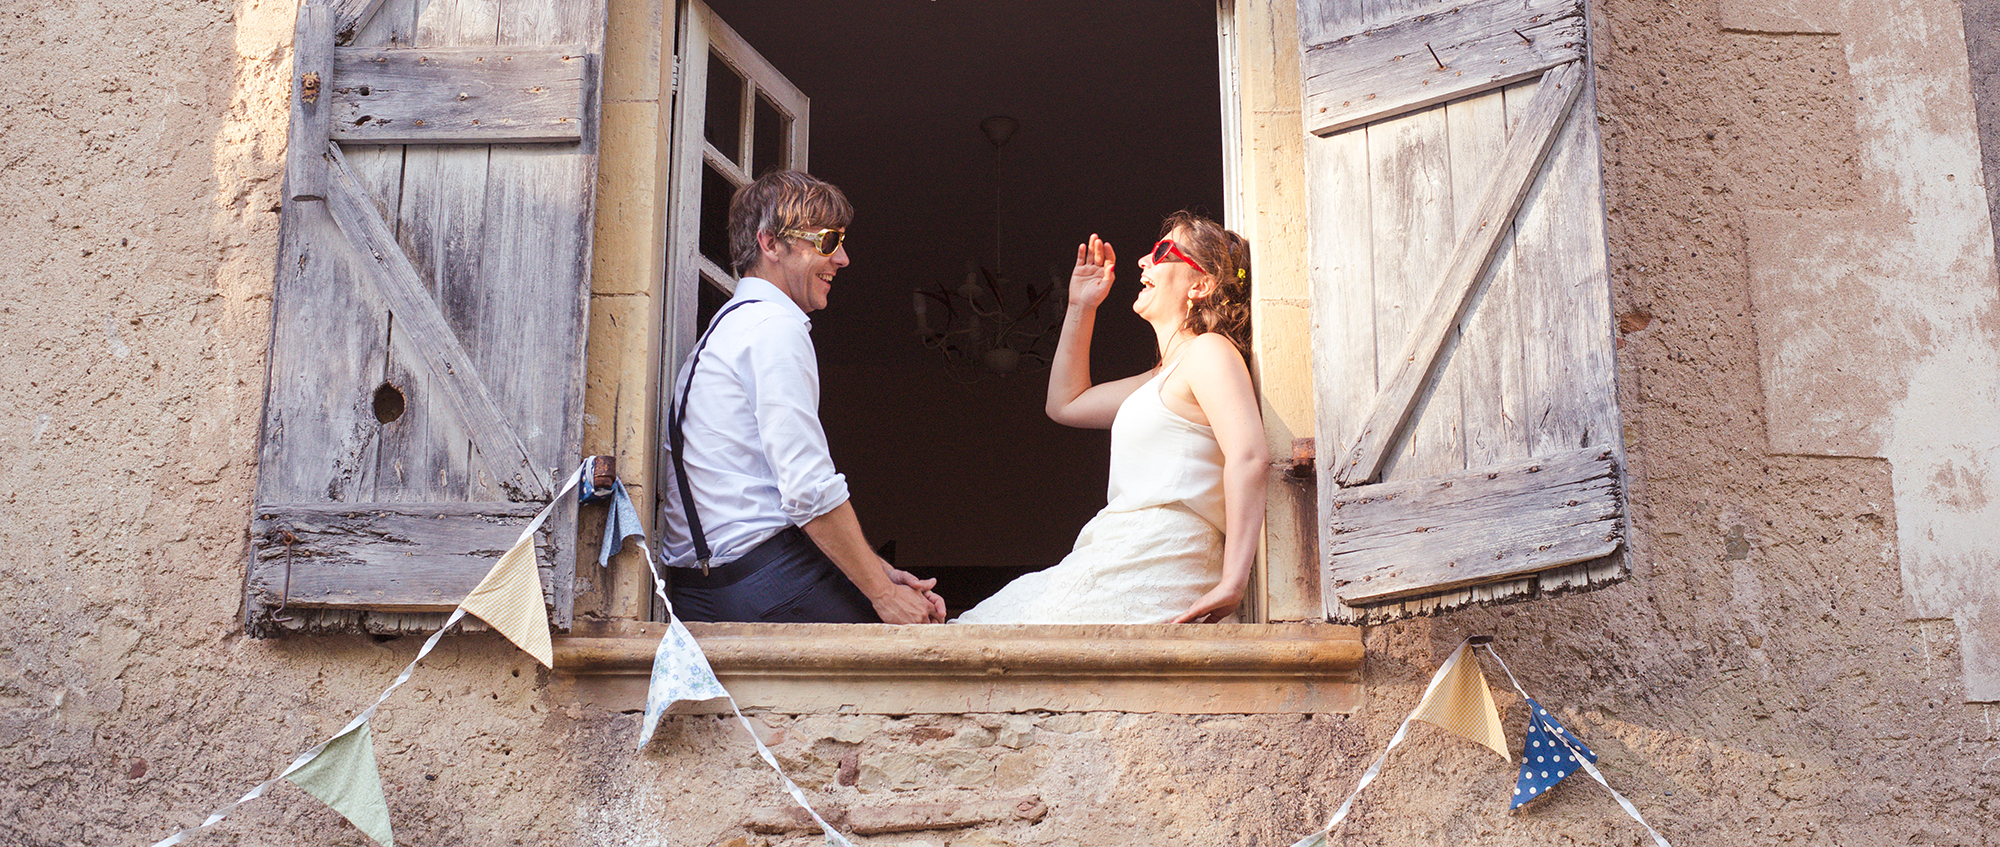 Wedding Photographer south of France